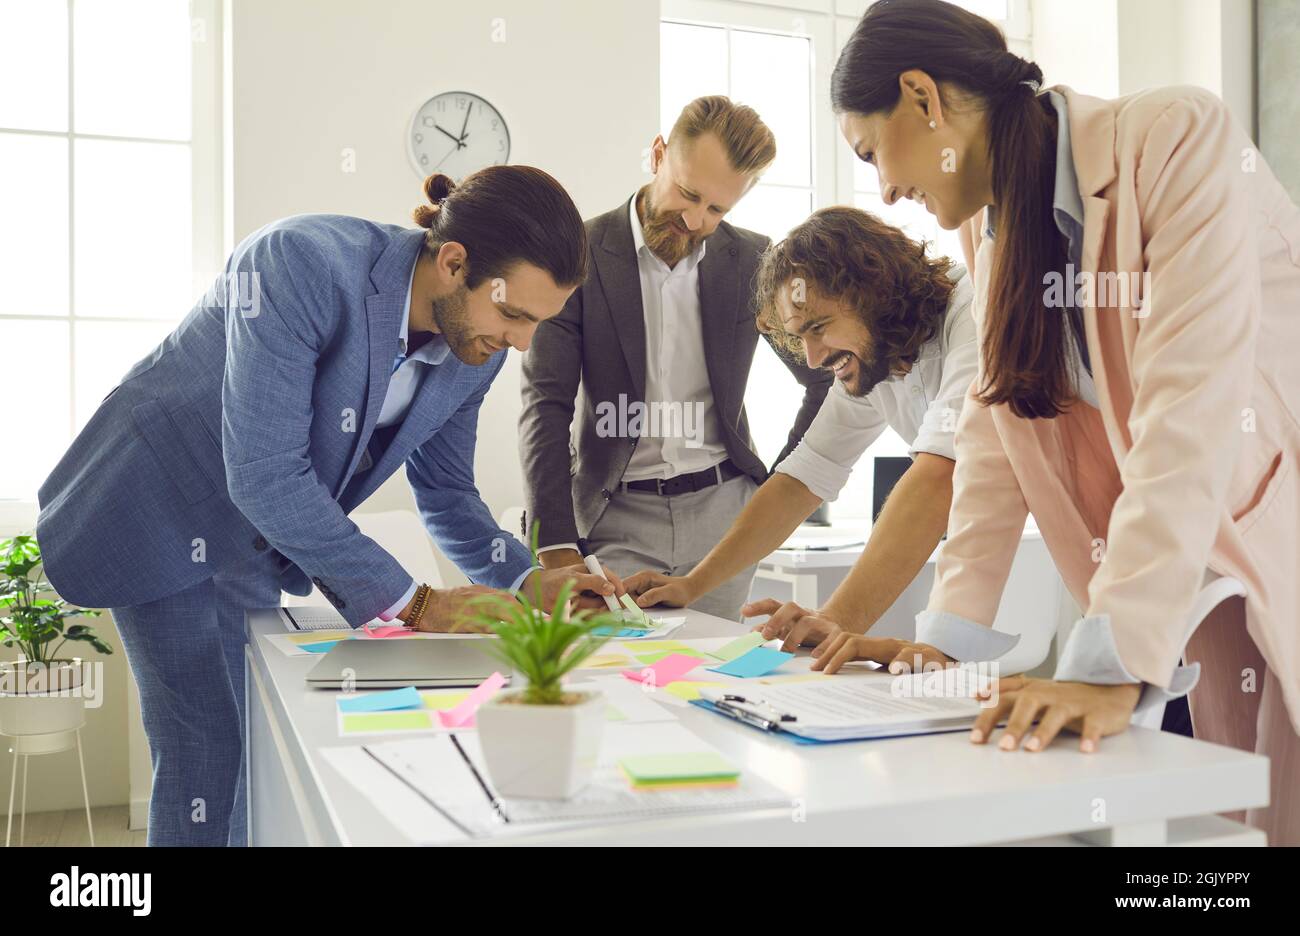 Creative team of smart expert CEOs working together to plan new business strategy. Stock Photo